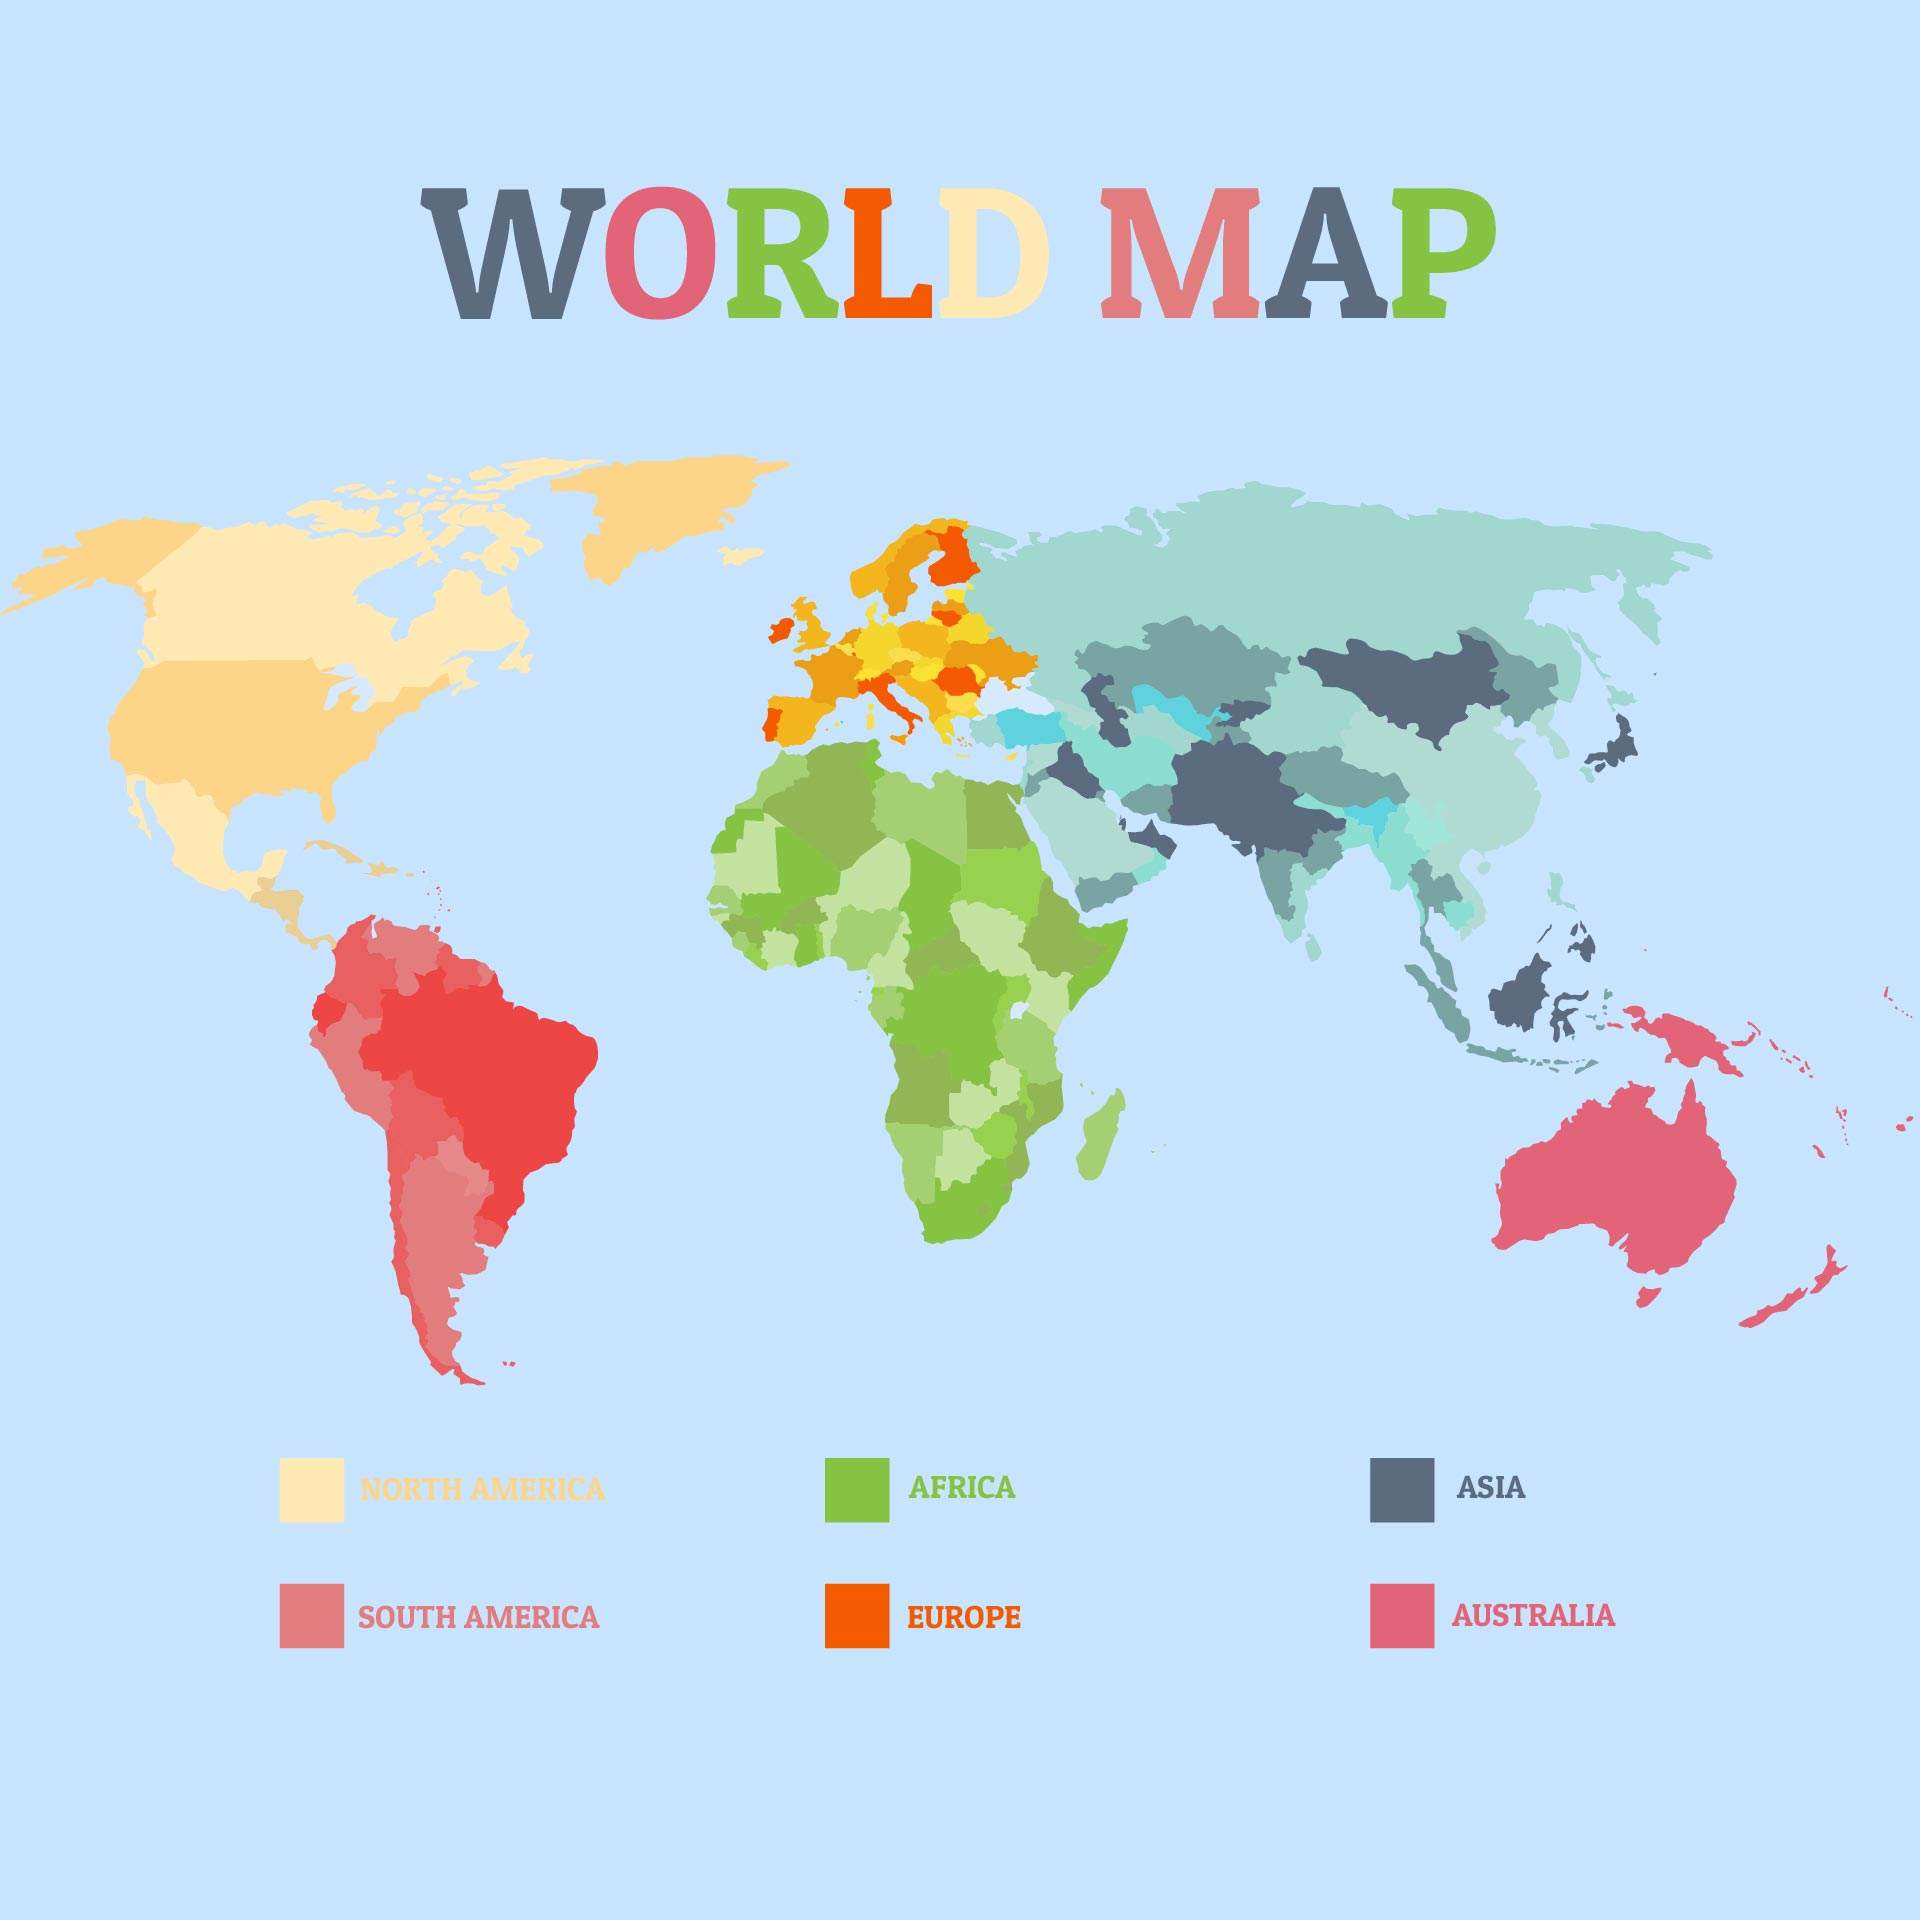 Printable World Map Showing Countries - Map of world